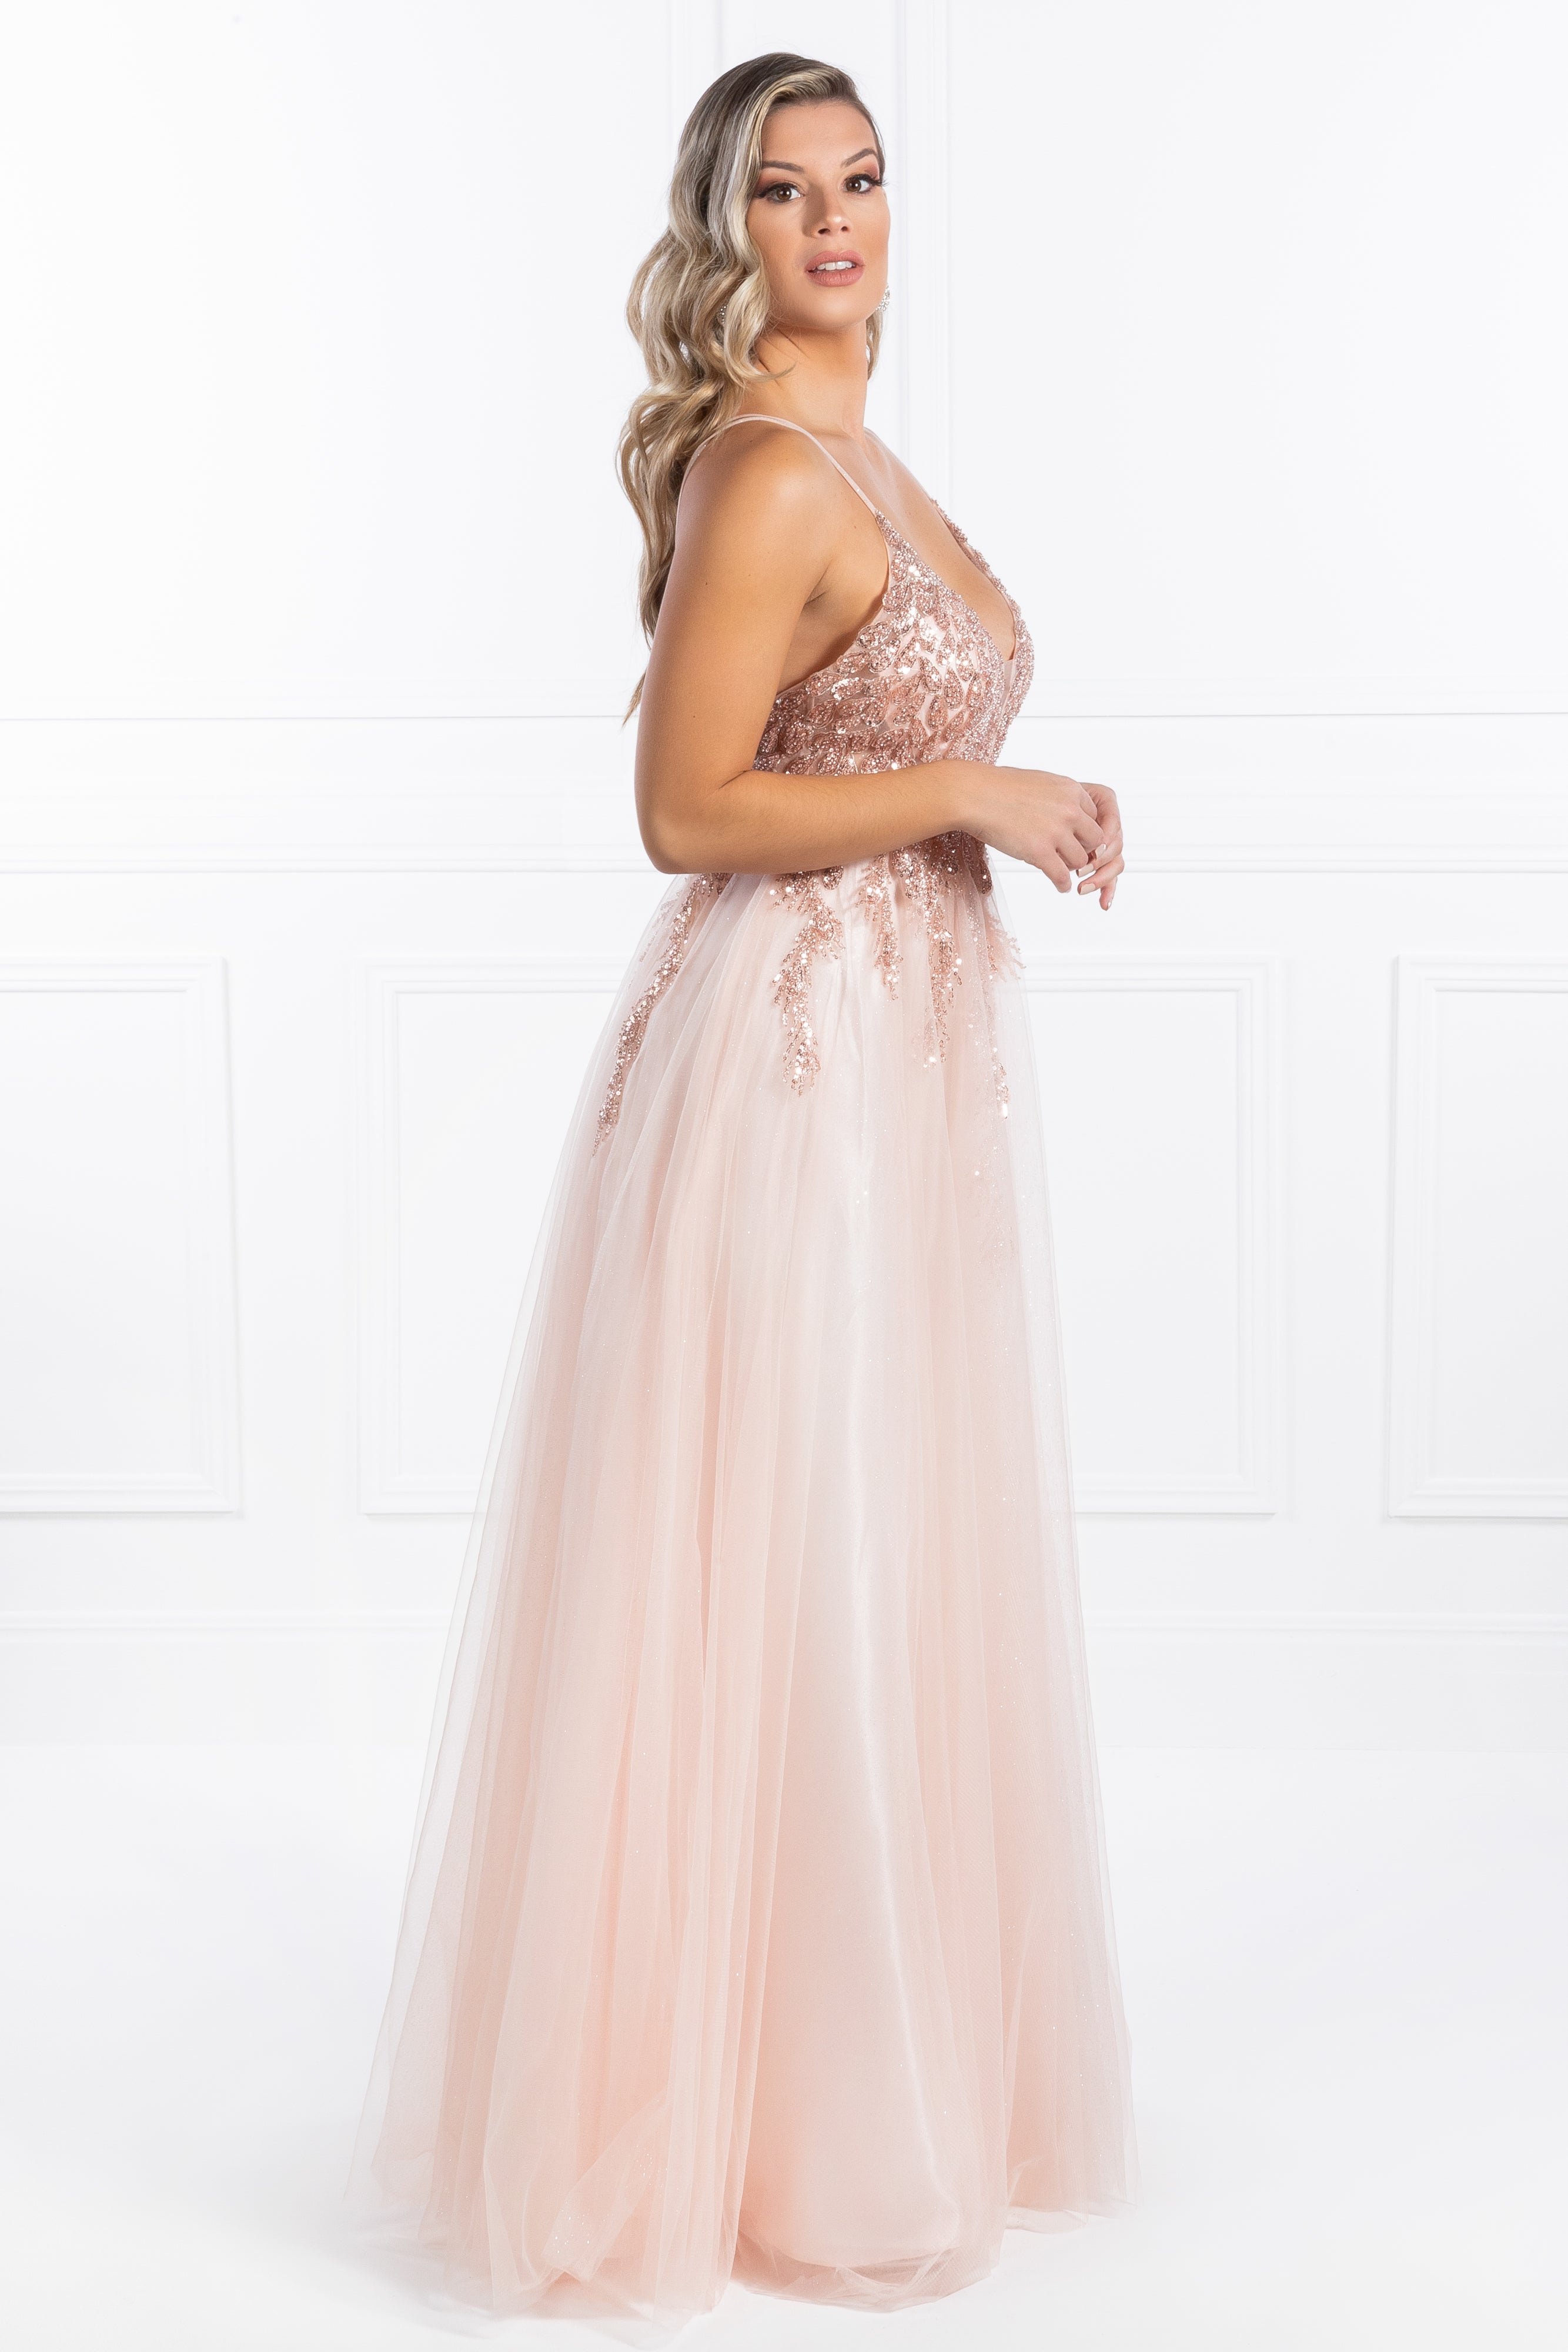 Honey Couture EDEN Blush Crystal Beaded Tulle Formal Gown